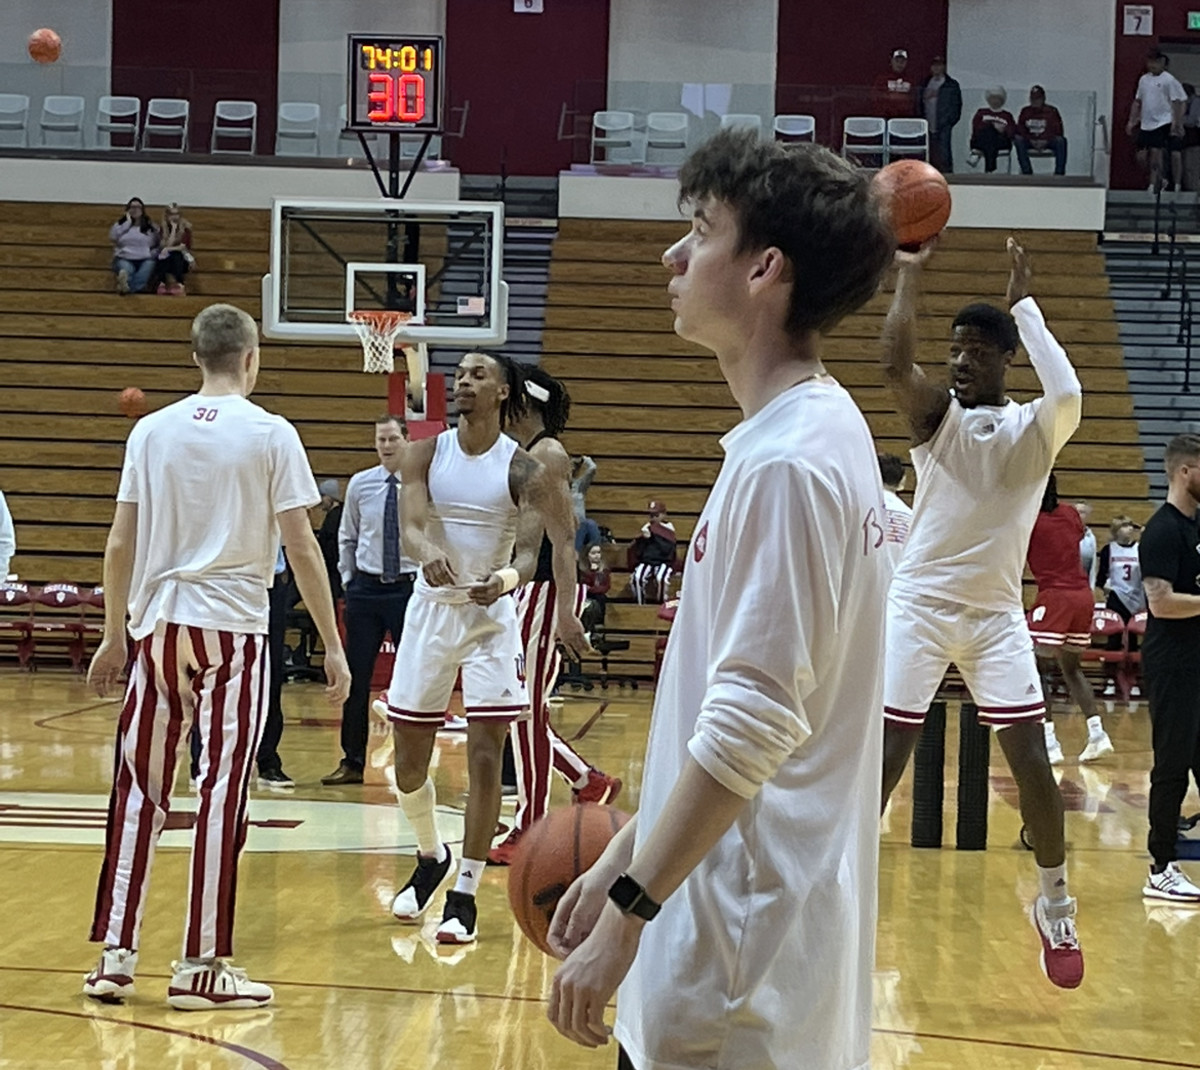 Indiana guards CJ Gunn (left) and Xavier Johnson (right) warming up for Tuesday's game against Wisconsin.